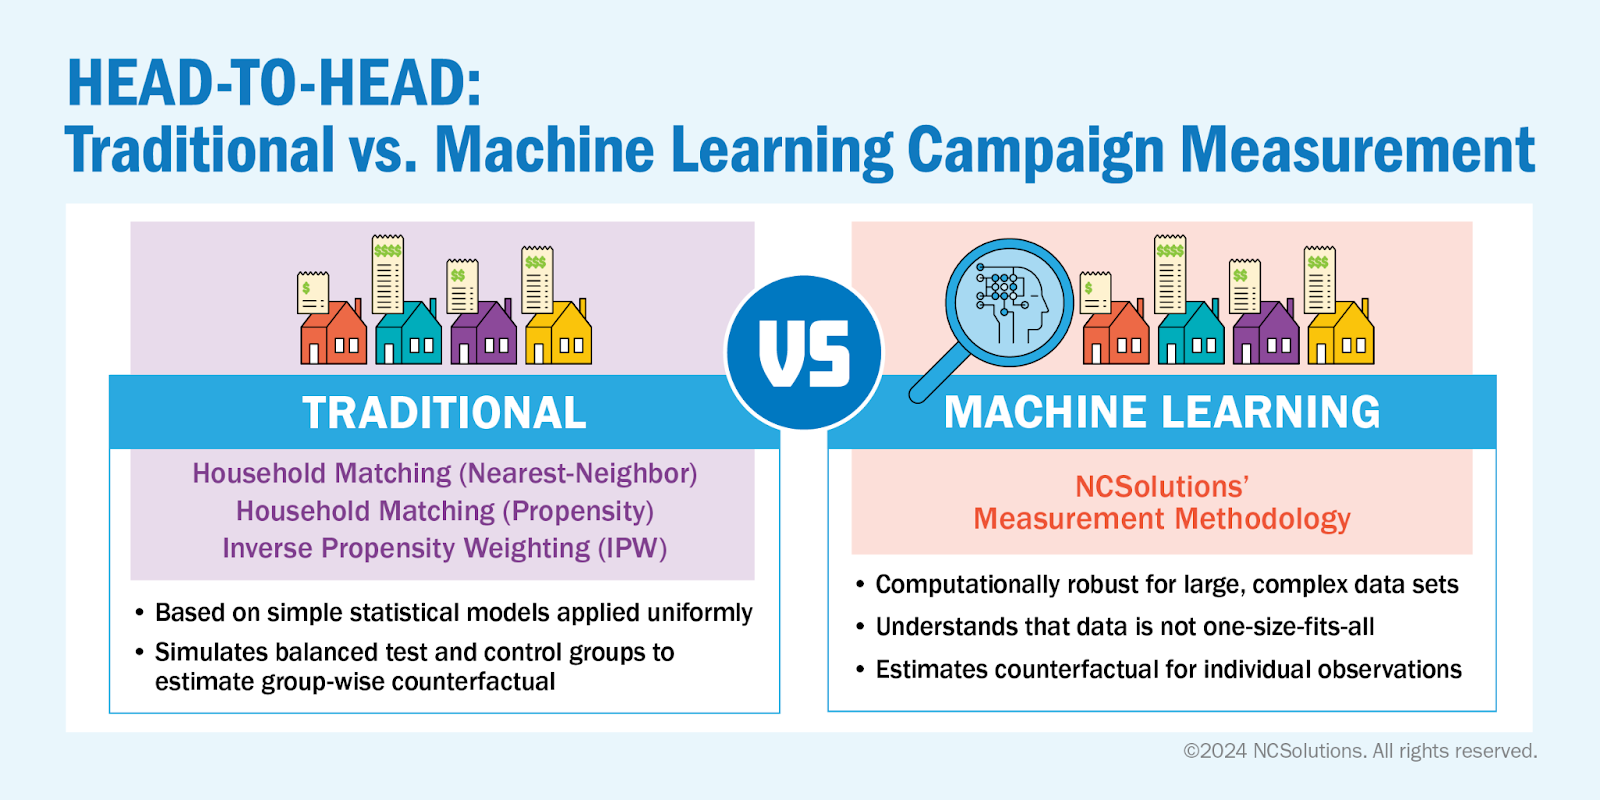 Head-to-Head: Traditional vs. Machine Learning Campaign Measurement 